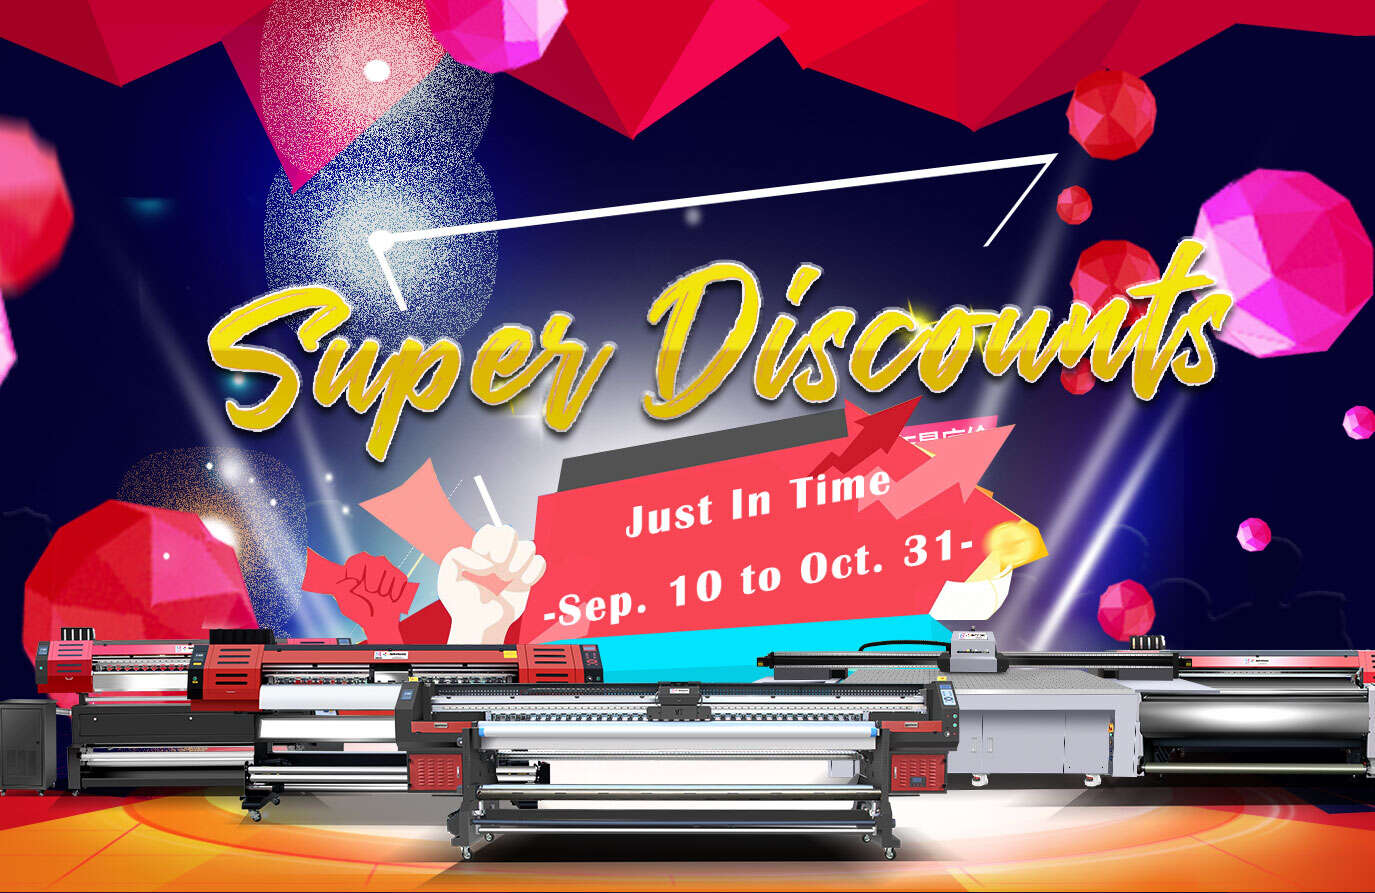 Super Discounts Just In Time Sep.10 to Oct.31